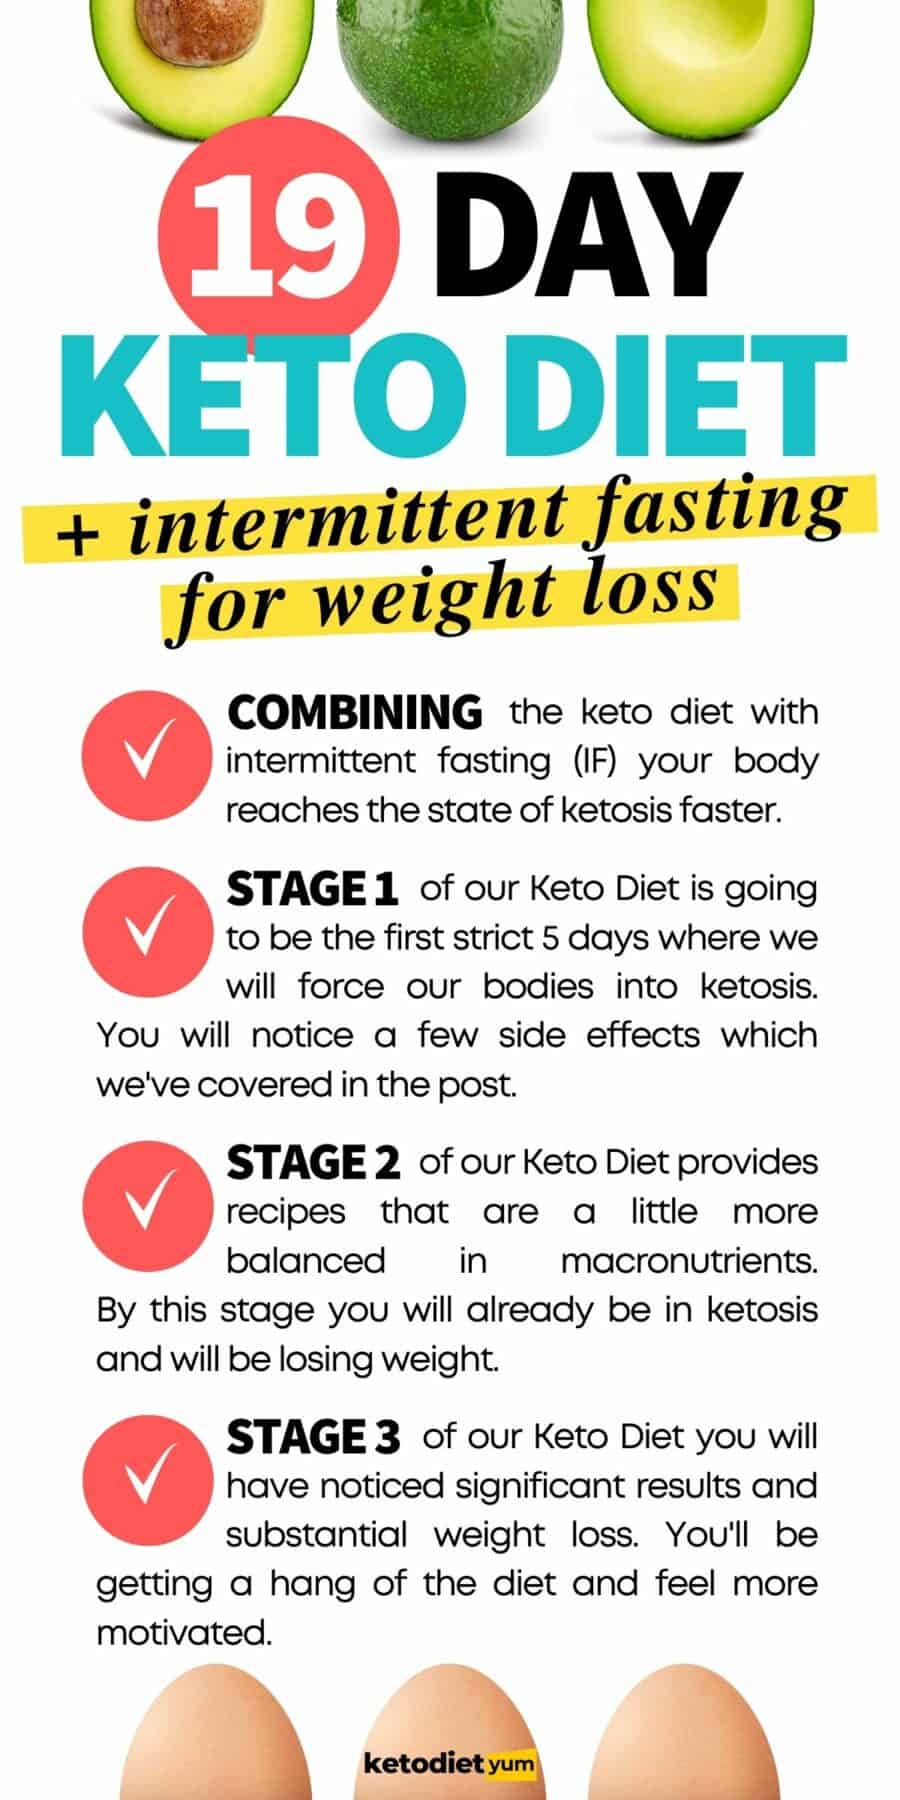 Keto Diet Meal Plan with Intermittent Fasting for Weight Loss